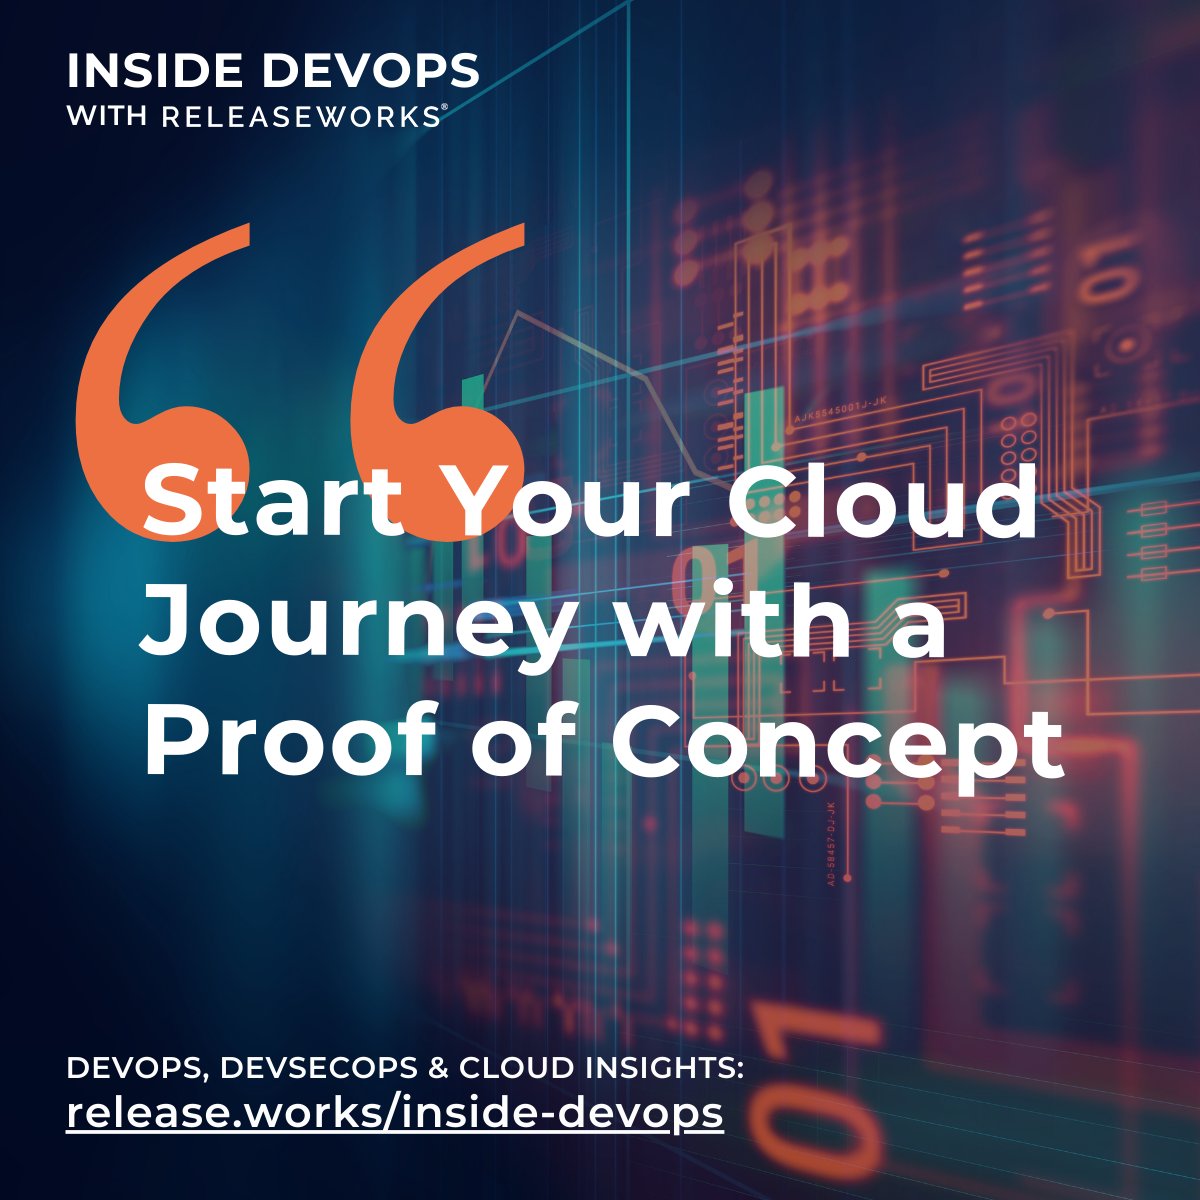 releaseworks: 🌥️ Thinking of moving to the cloud? 

Start with a Proof of Concept (PoC).

Read more here: rw.gd/n6TJv
#Innovation #ProofOfConcept #DigitalTransformation